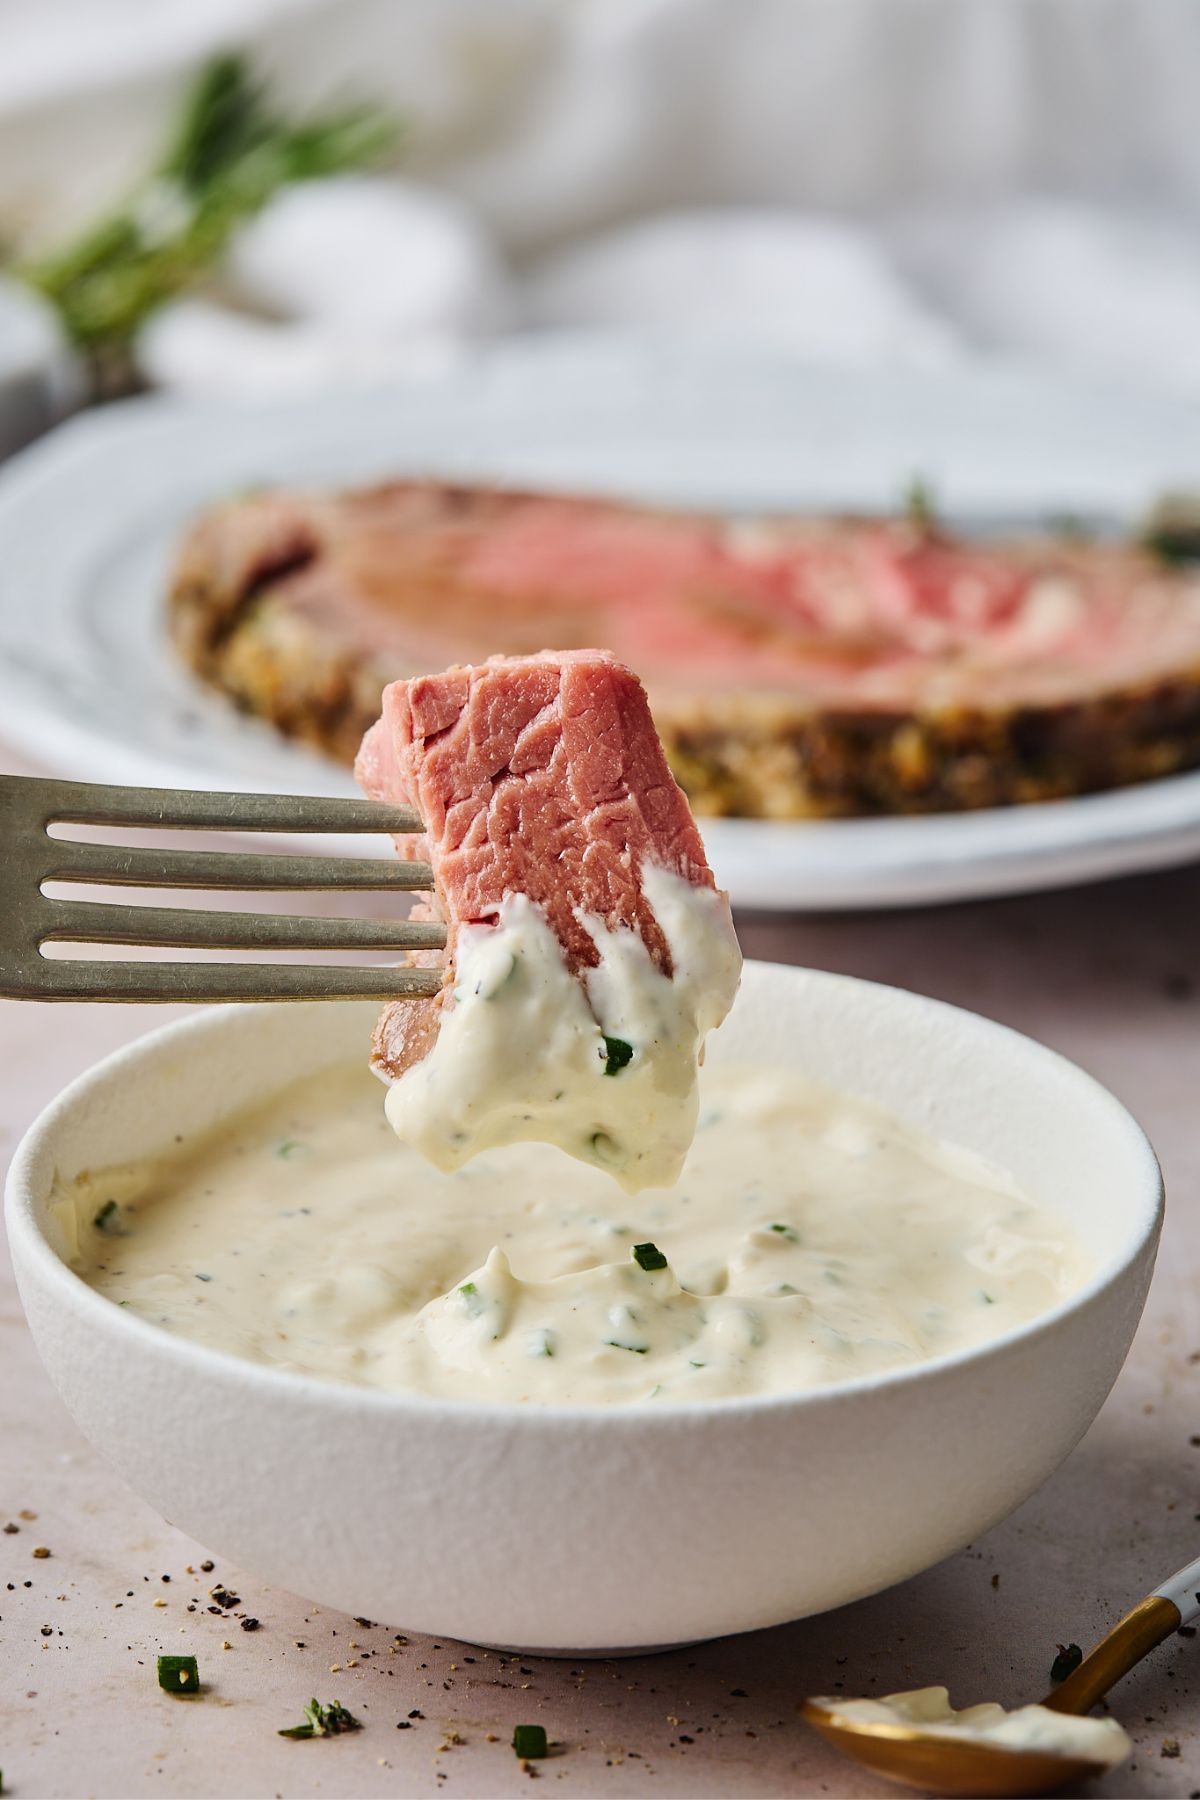 Bite of prime rib being dipped in a small bowl full of the best horseradish sauce recipe